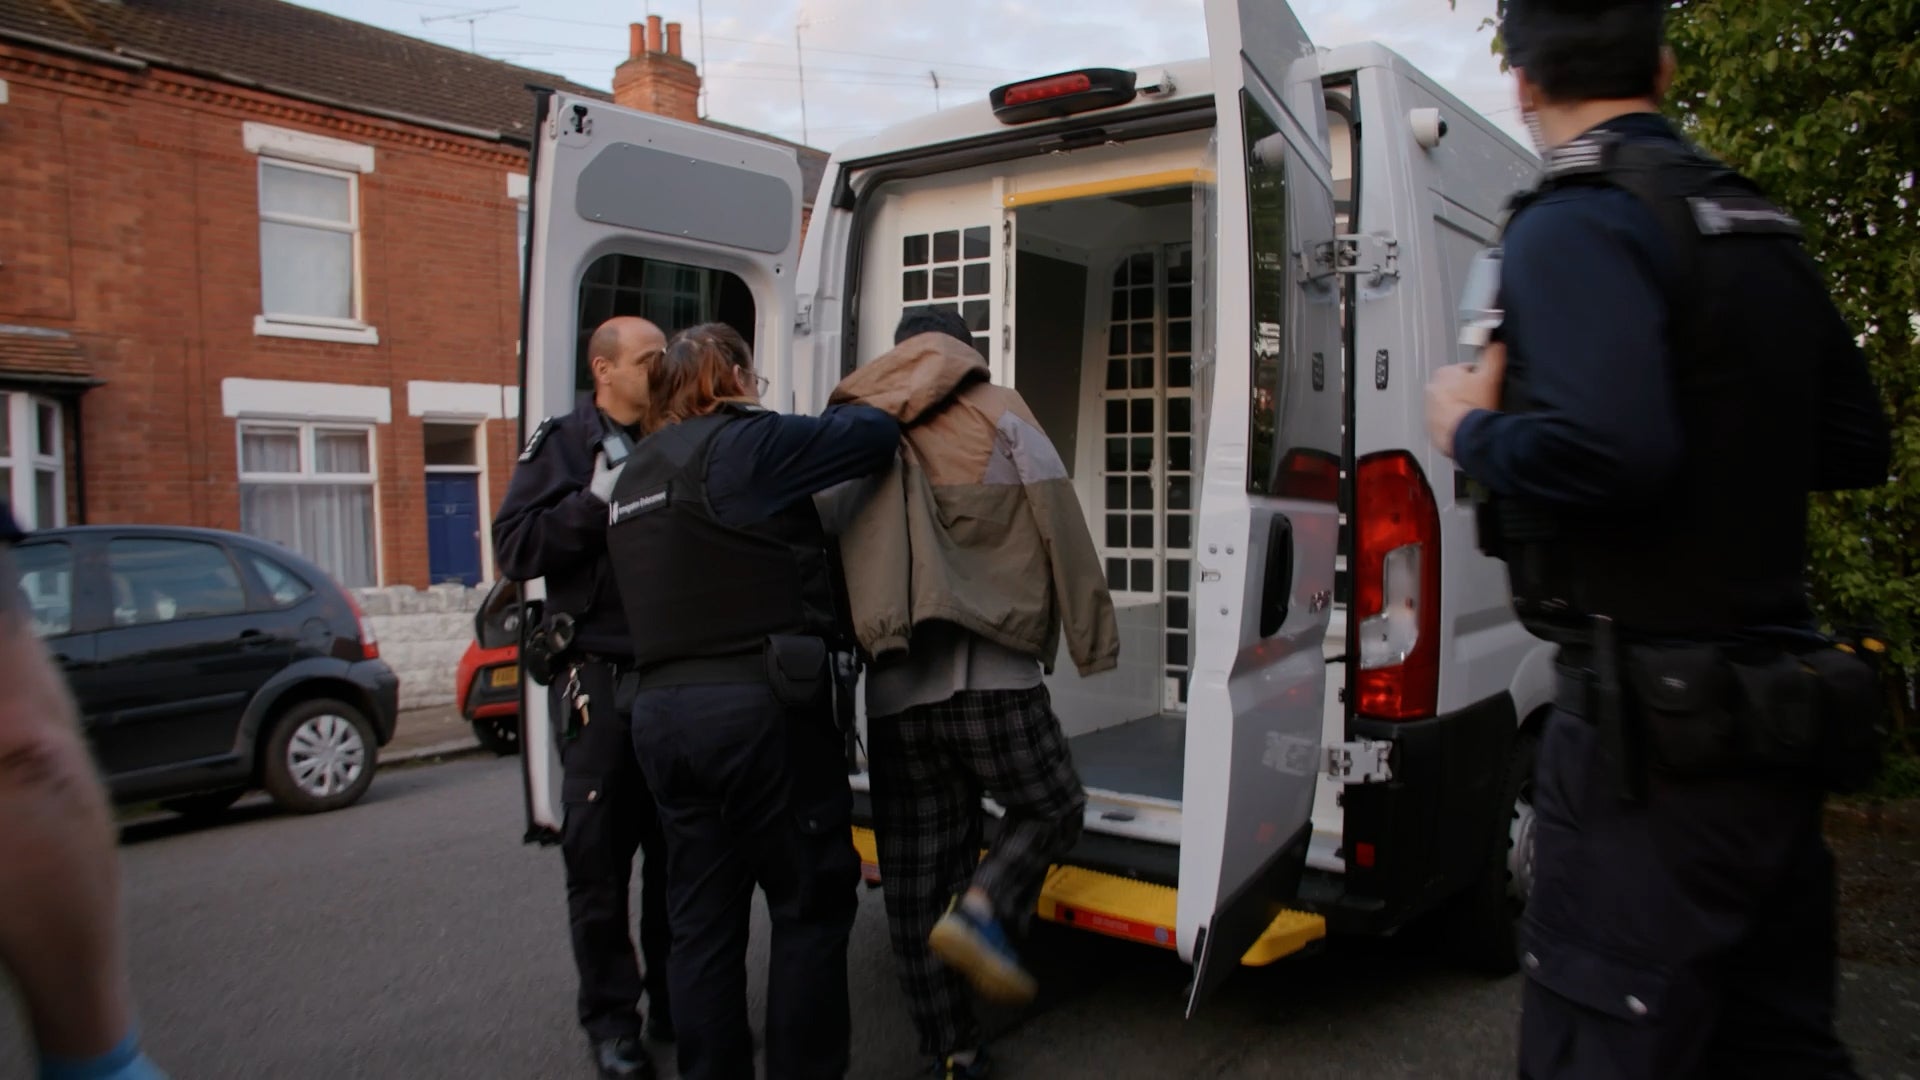 The Refugee Council said the detentions were causing ‘fear, distress and great anxiety’